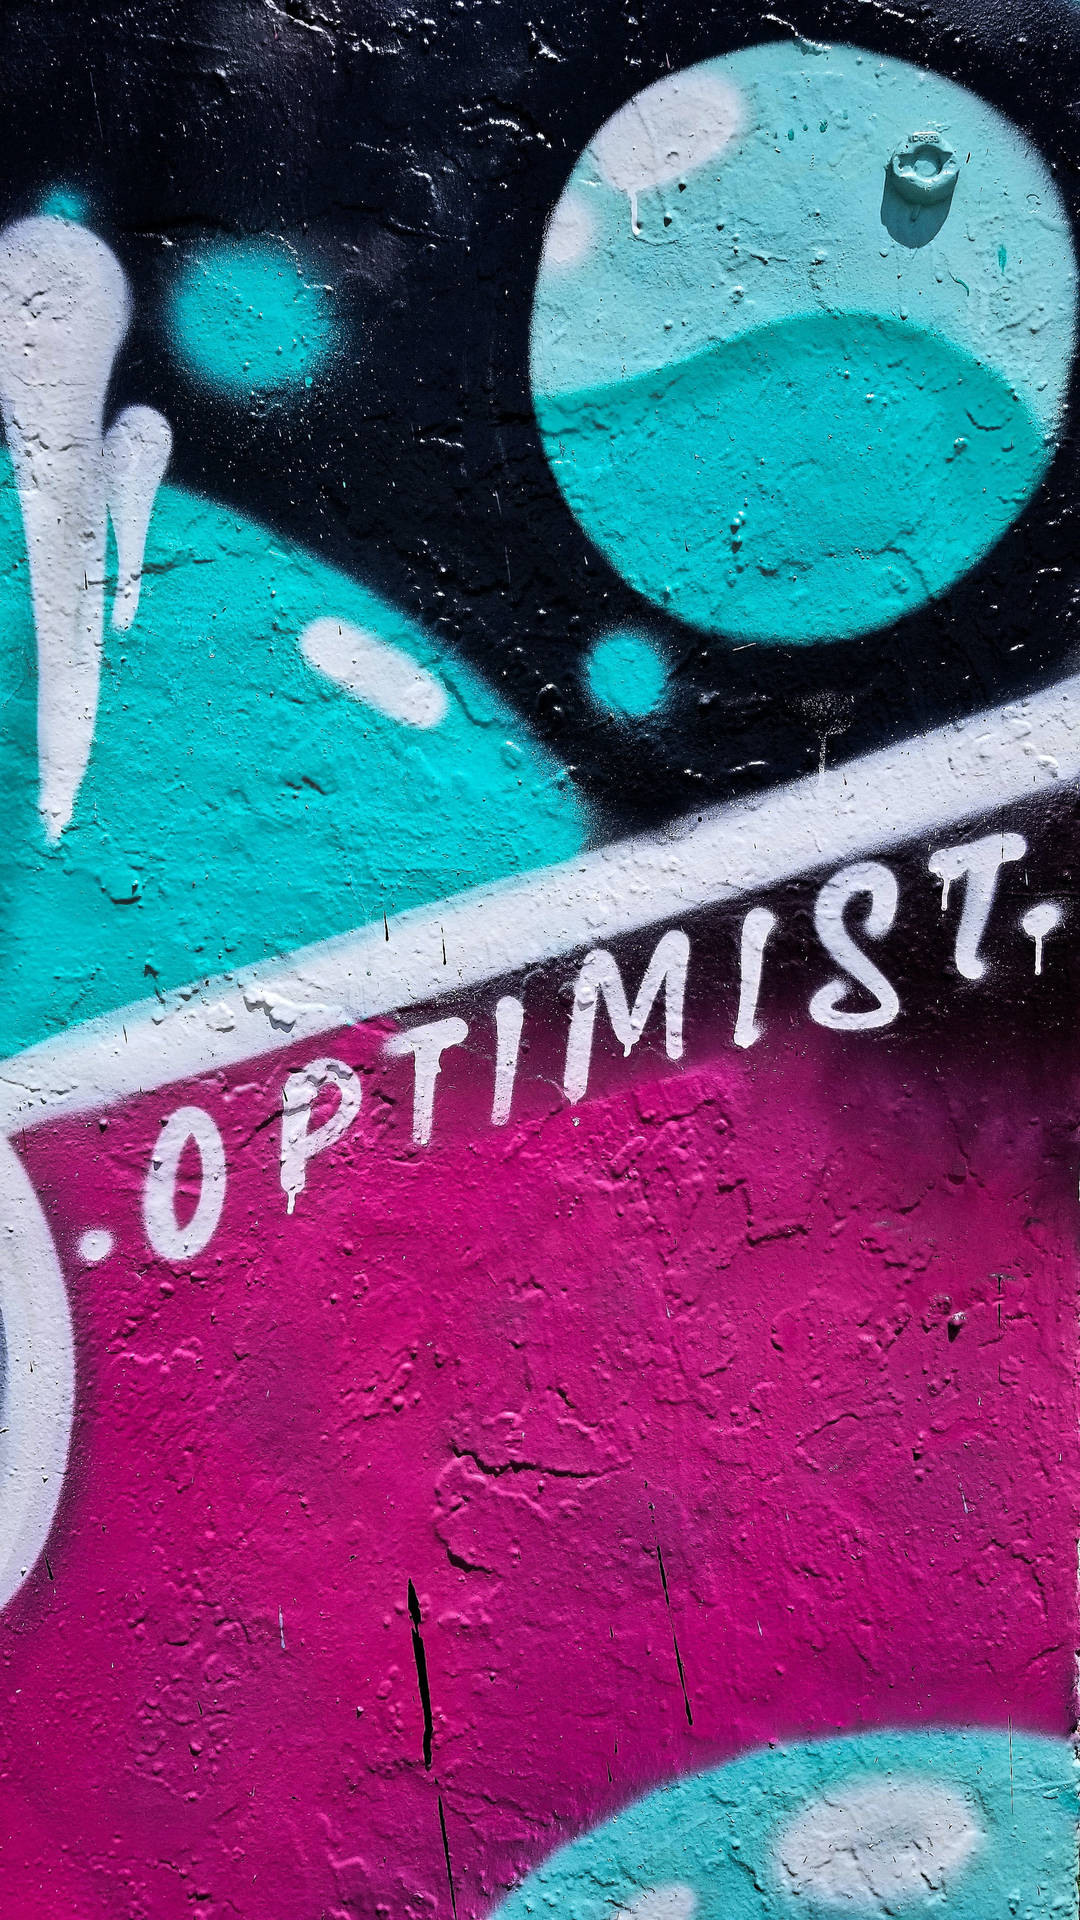 Optimist Abstract Wall Graffiti Iphone Background